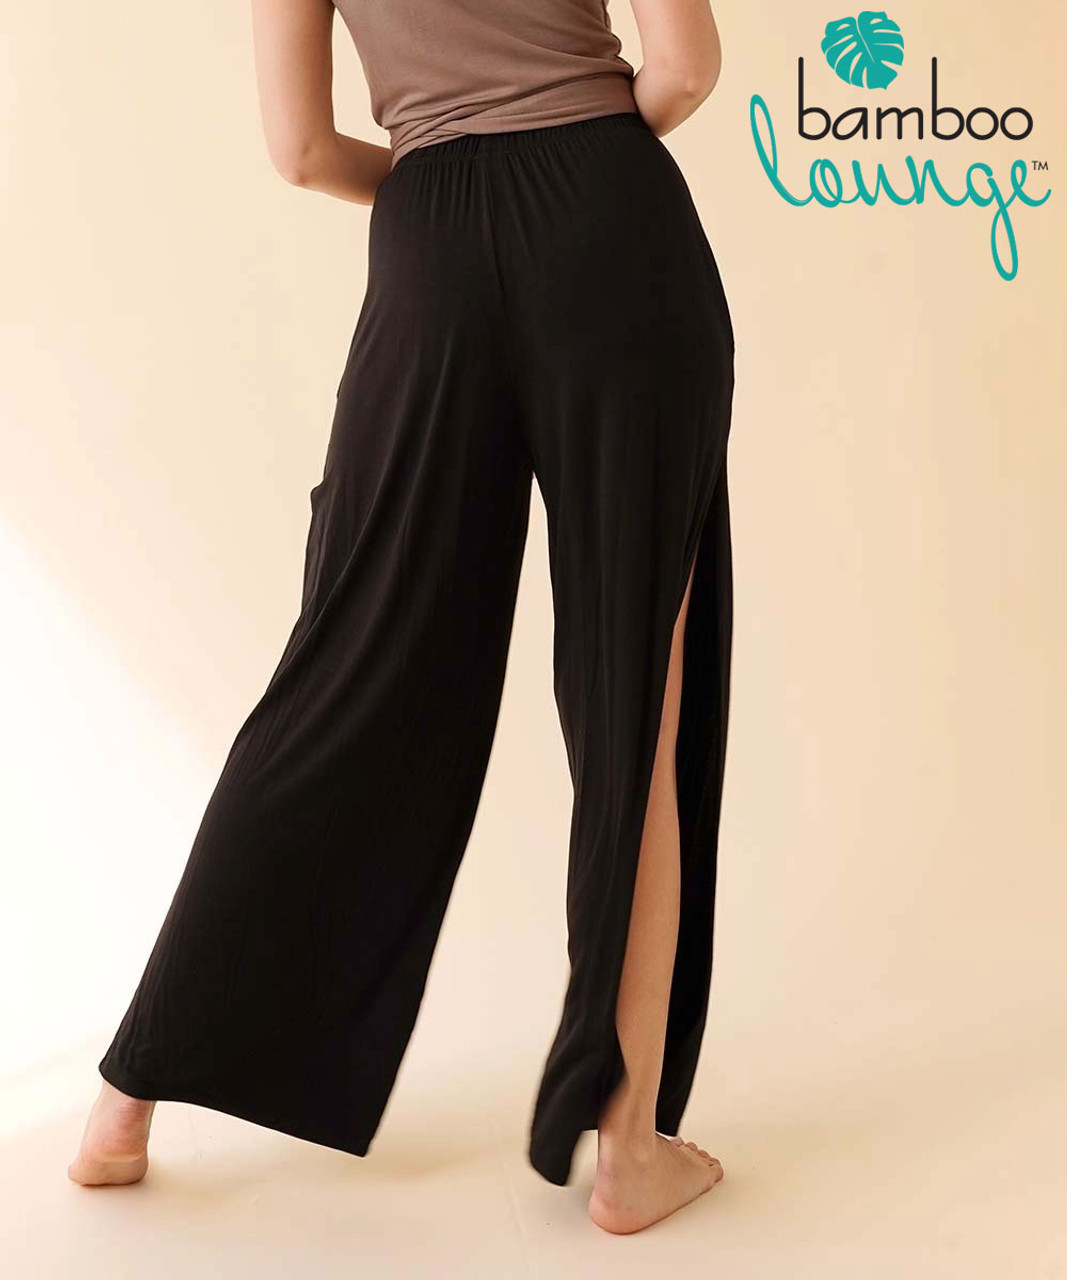 https://cdn11.bigcommerce.com/s-2e839/images/stencil/1280x1280/products/171/3167/Bamboo-Lounge-Side-Slit-Palazzo-Pants-Black6__41433.1655495681.jpg?c=2